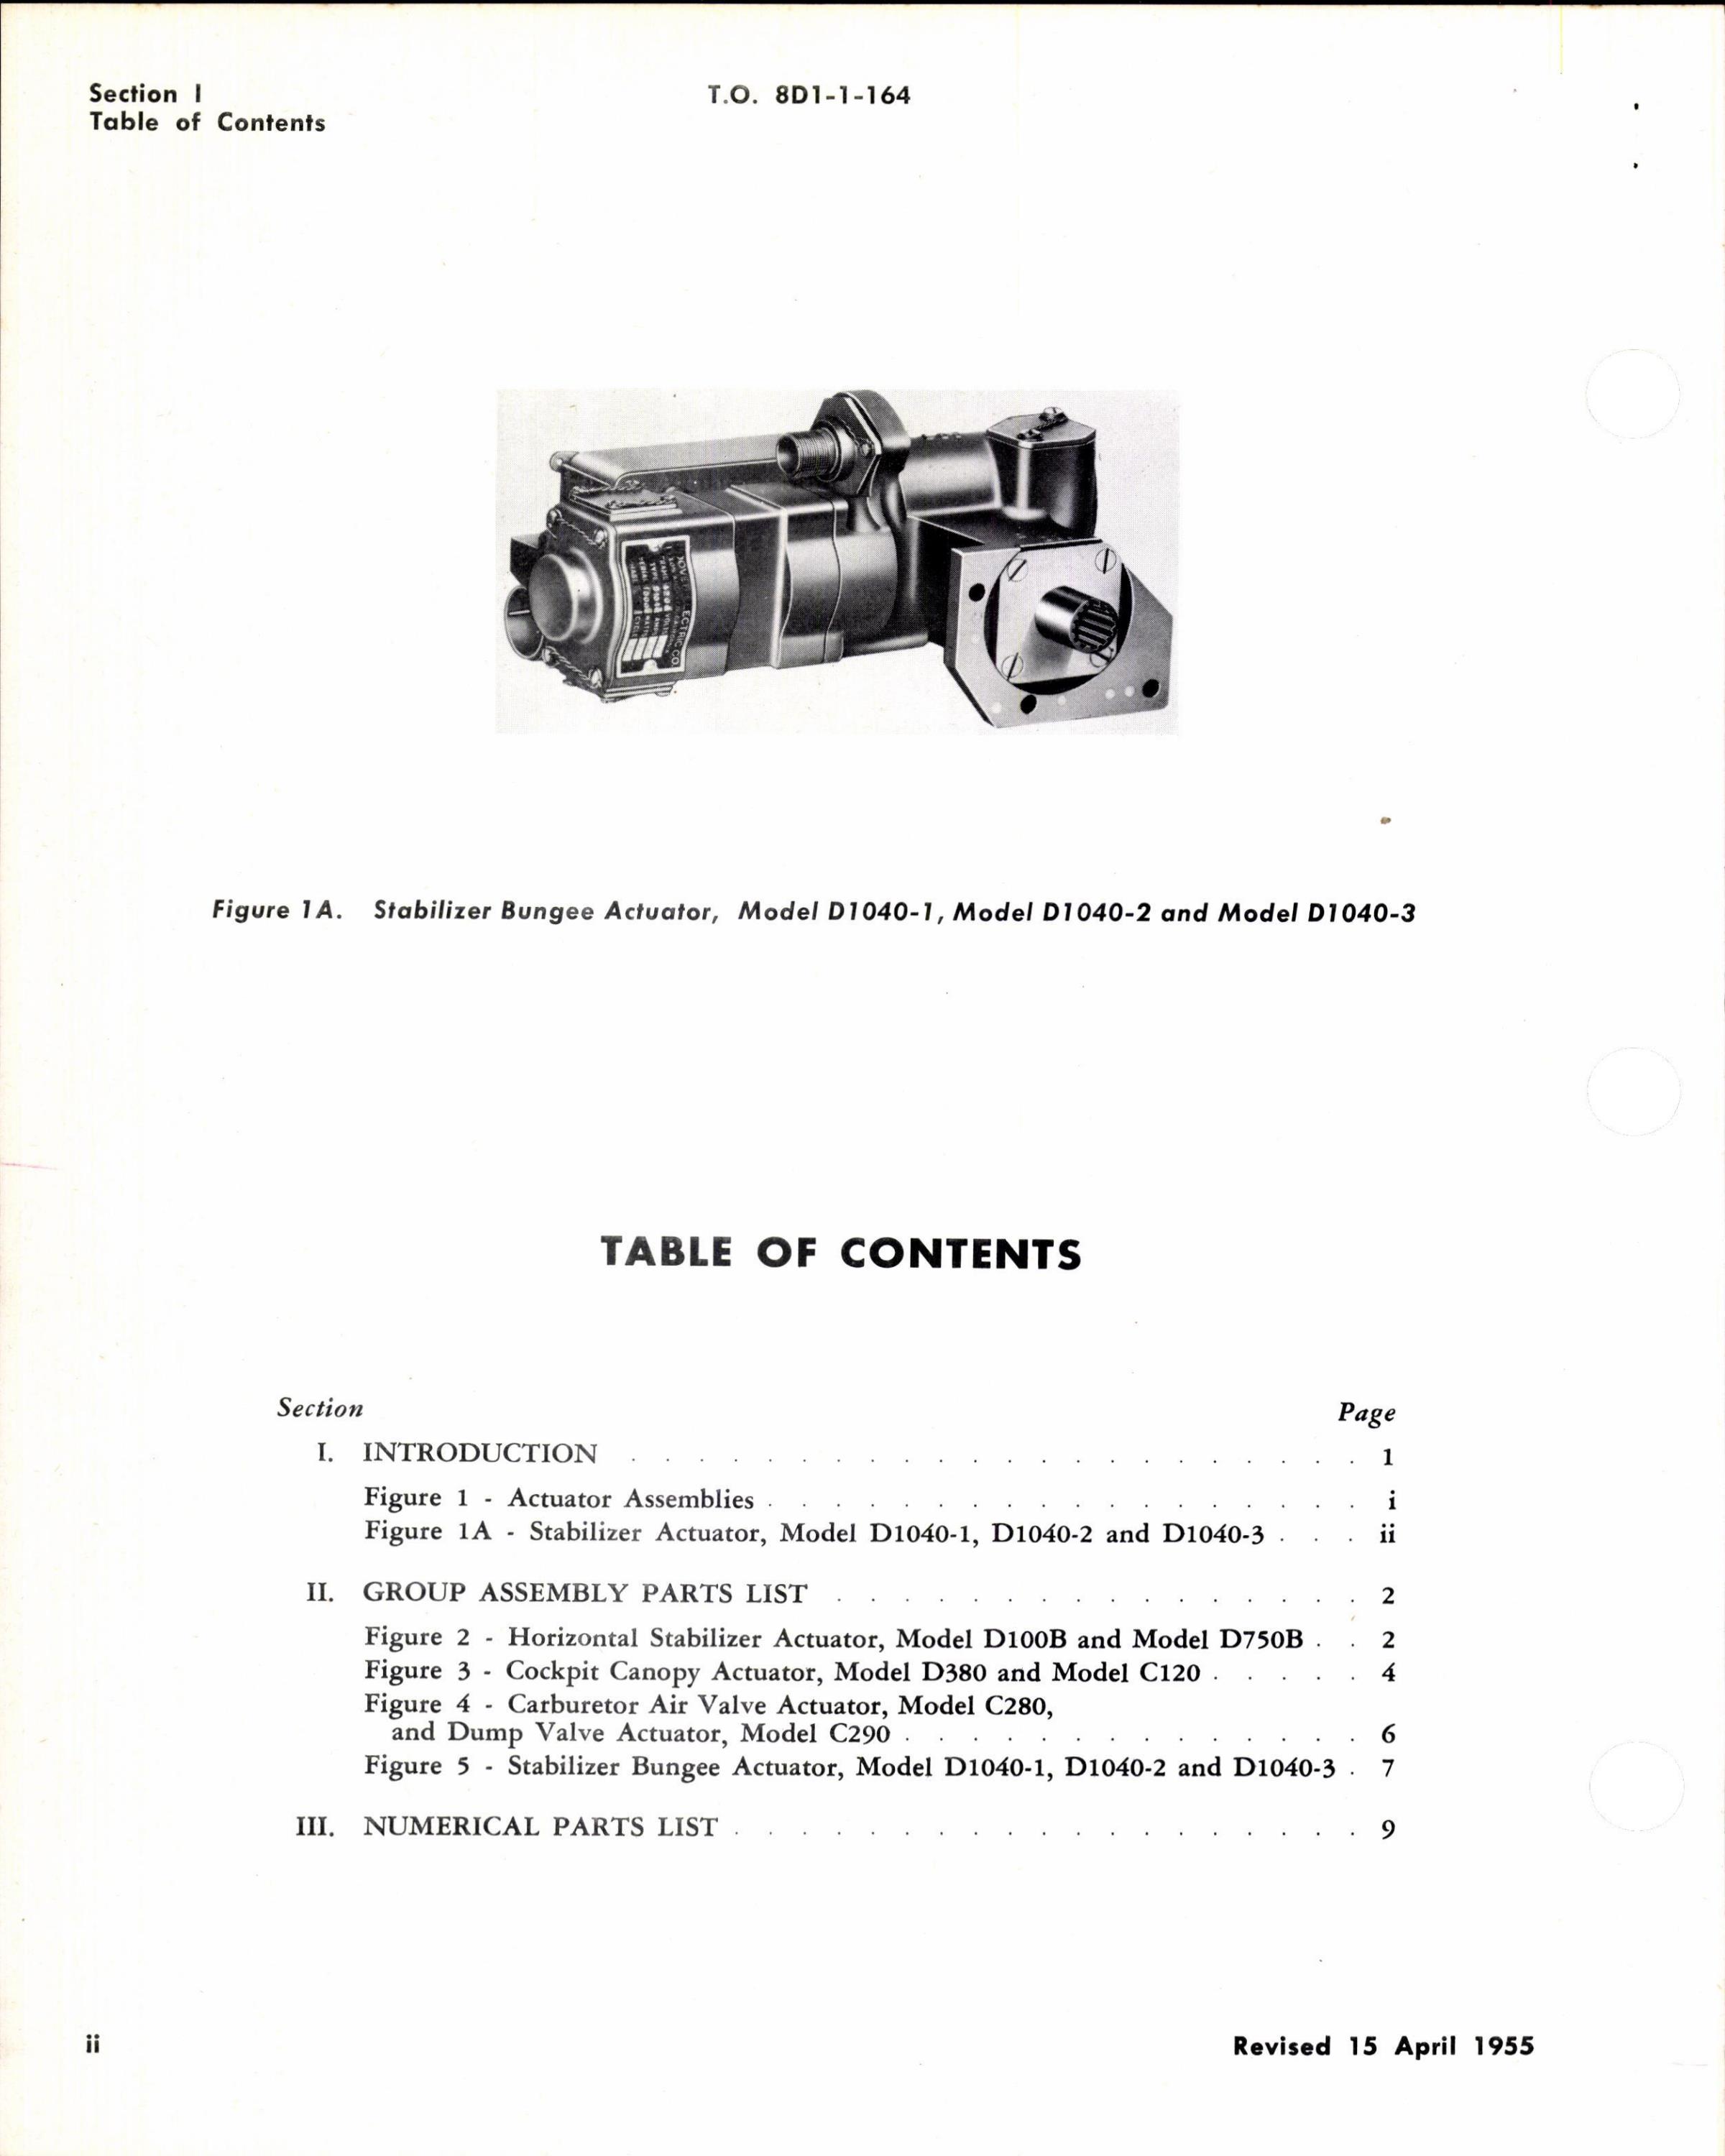 Sample page 4 from AirCorps Library document: Overhaul Instructions for Aircraft Actuators Models D100B, D750B, D380, D1040-1, D1040-2, D1040-3, C120, C280, and C290